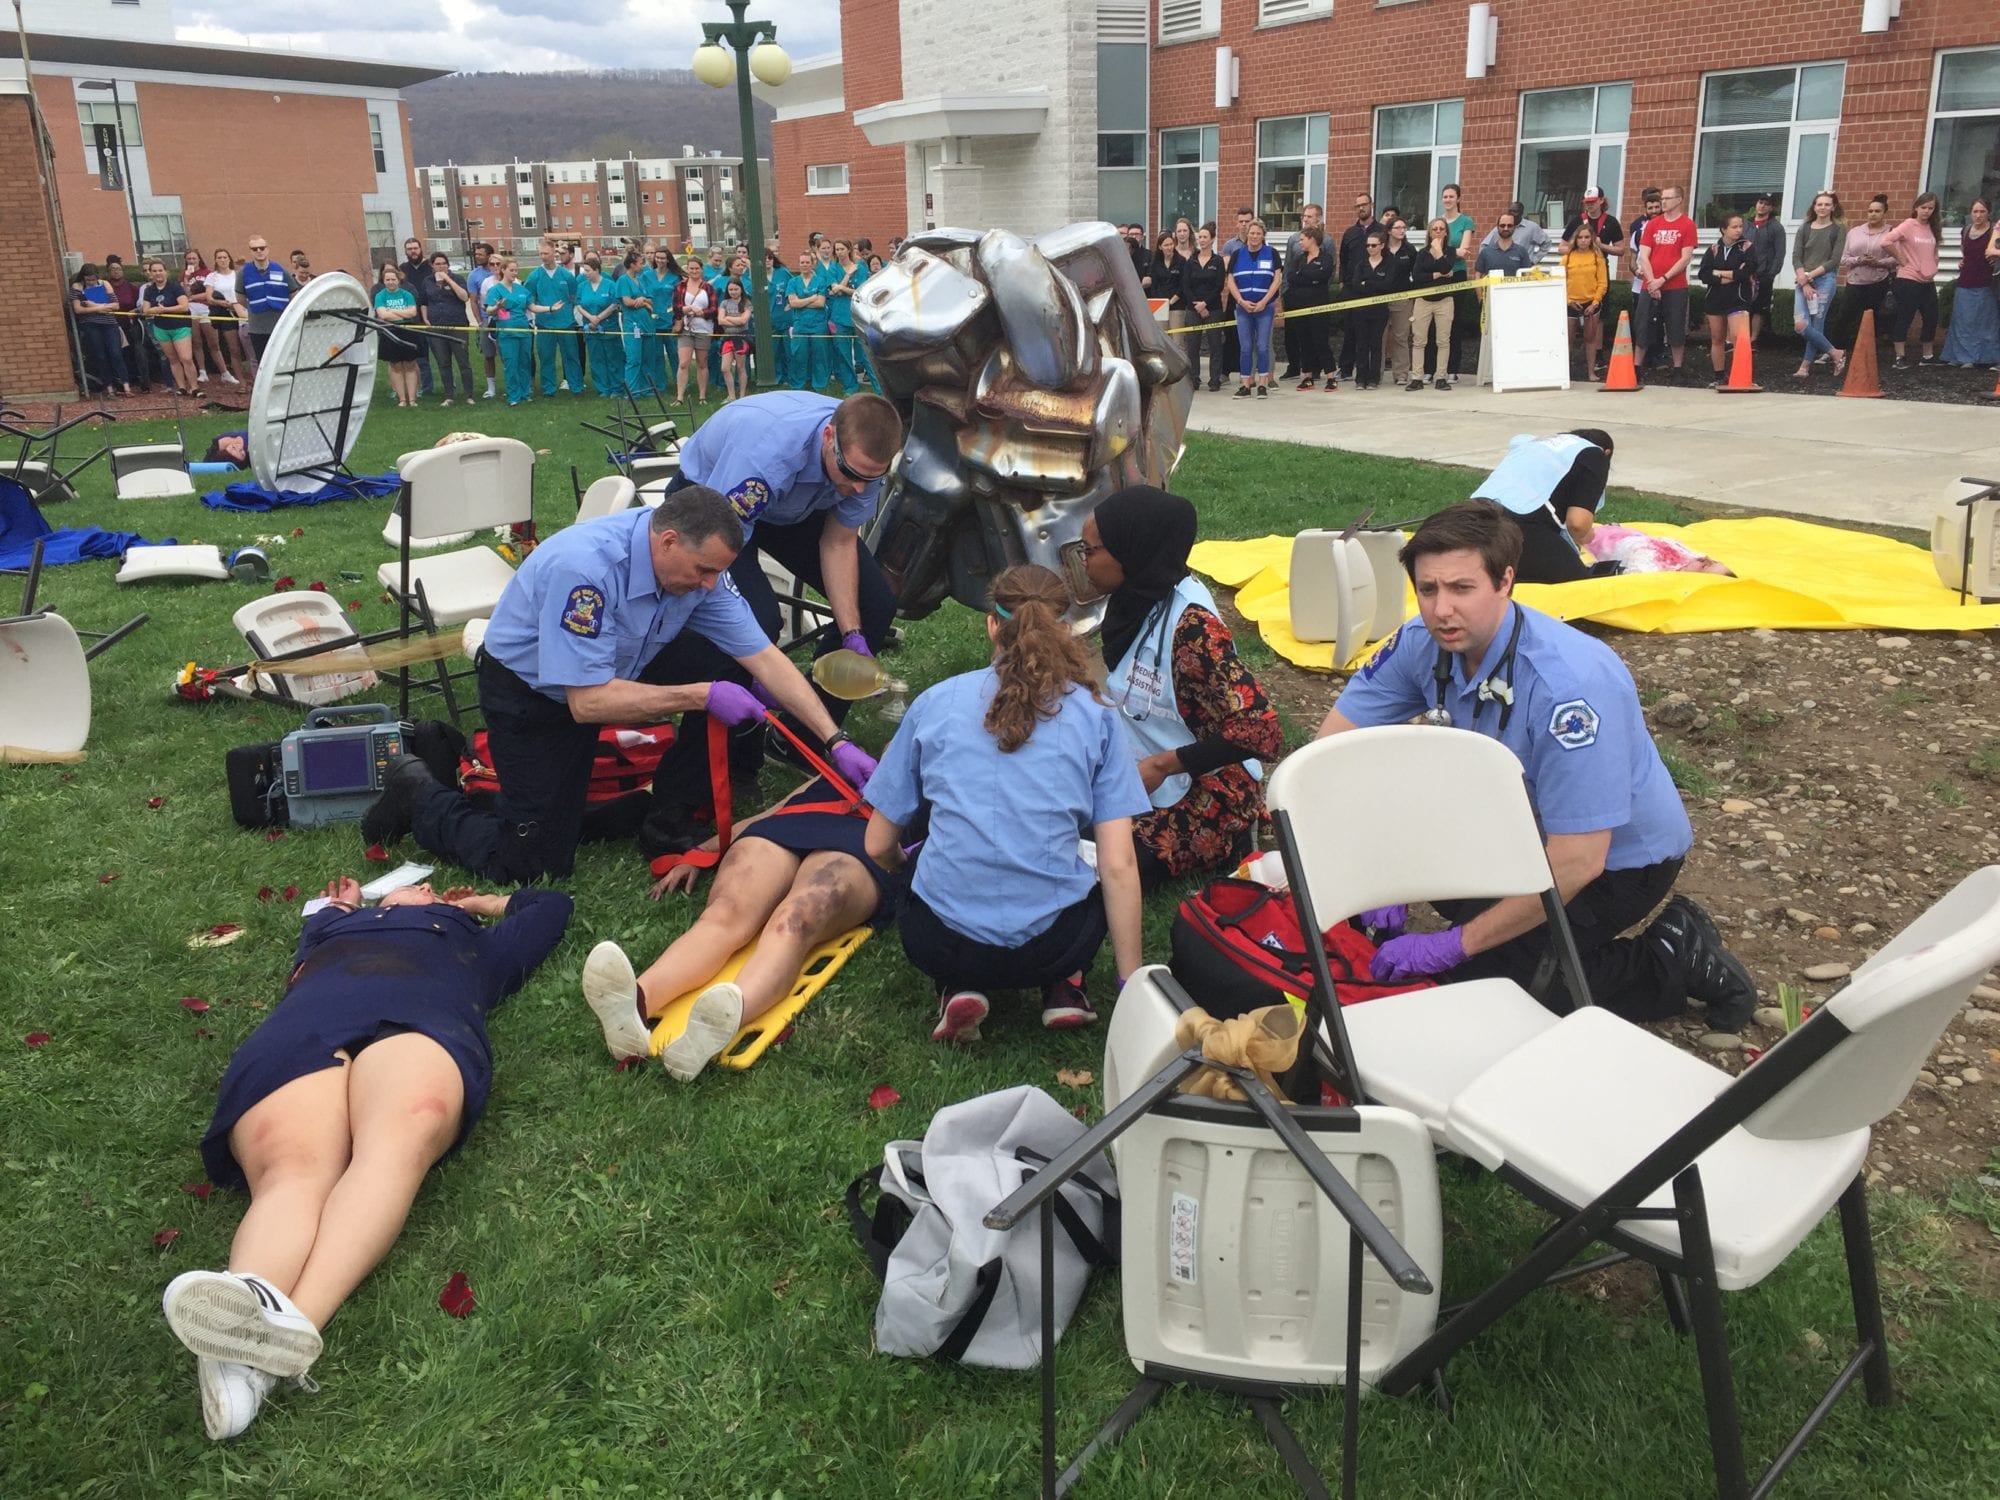 The next scenario for the Mock Disaster could be yours! Submit your ideas by Nov. 29